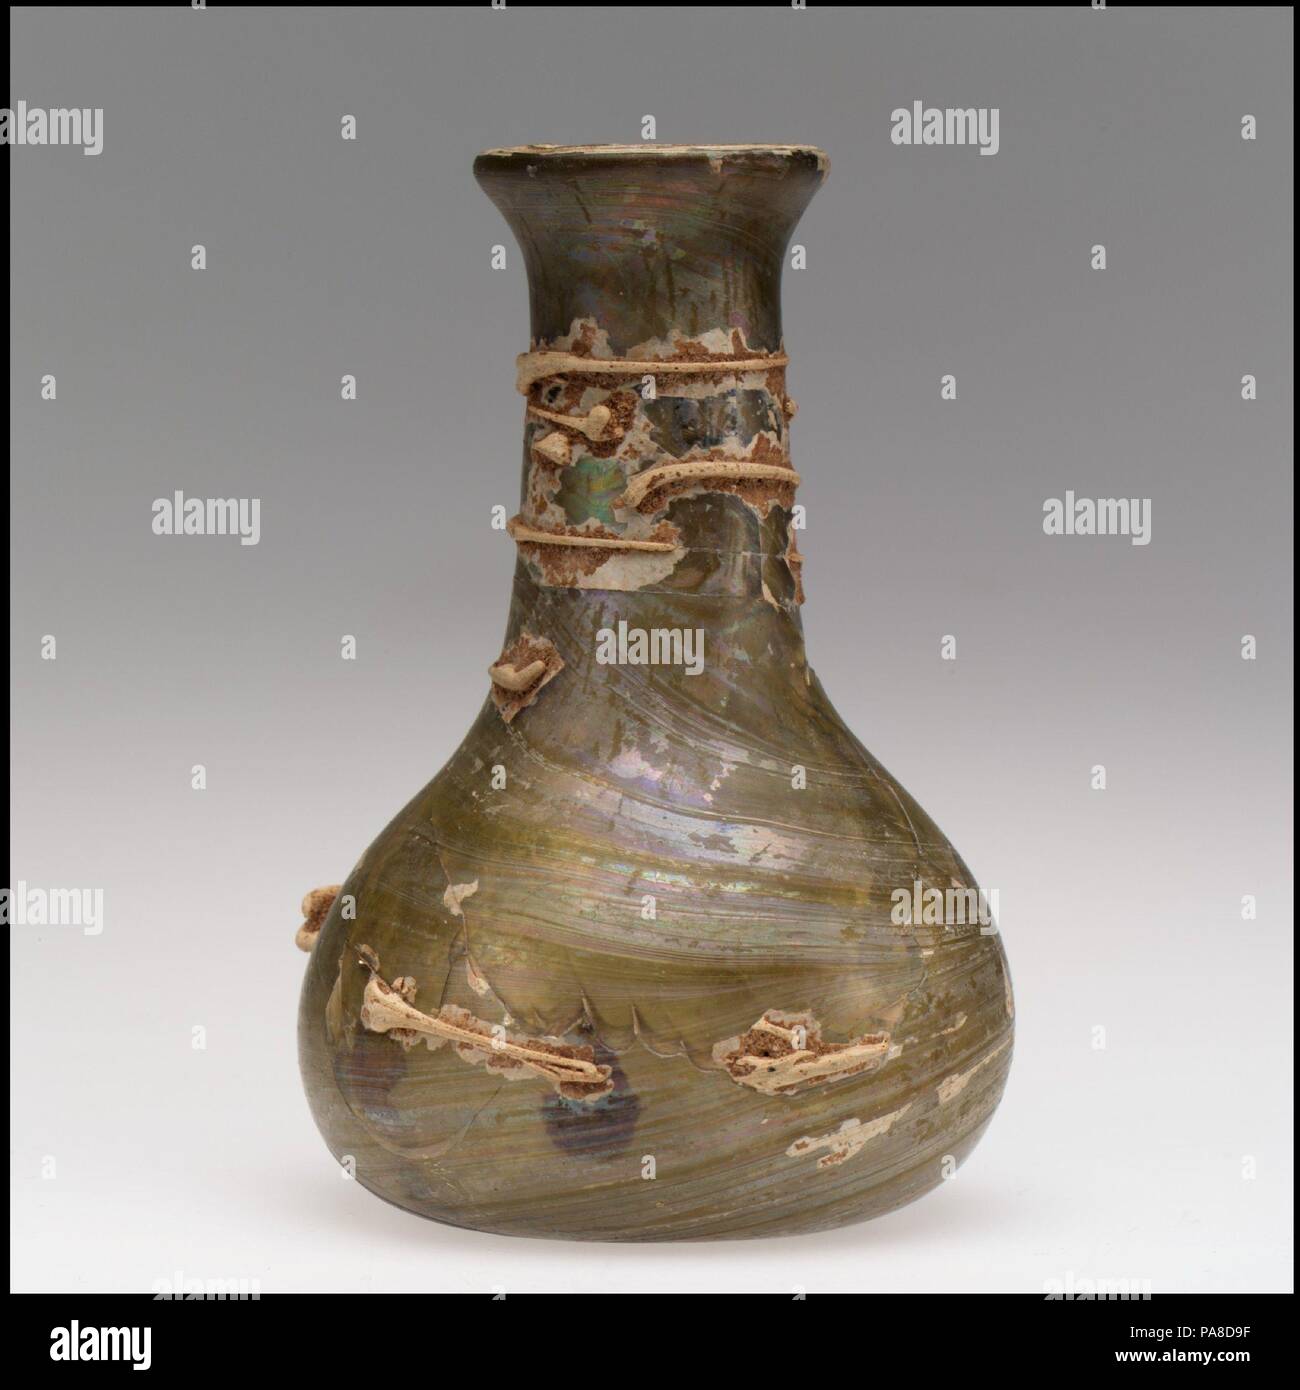 Bottle. Culture: Frankish. Dimensions: Overall: 4 1/8 x 2 13/16 in. (10.5 x 7.1 cm). Date: 5th-7th century. Museum: Metropolitan Museum of Art, New York, USA. Stock Photo